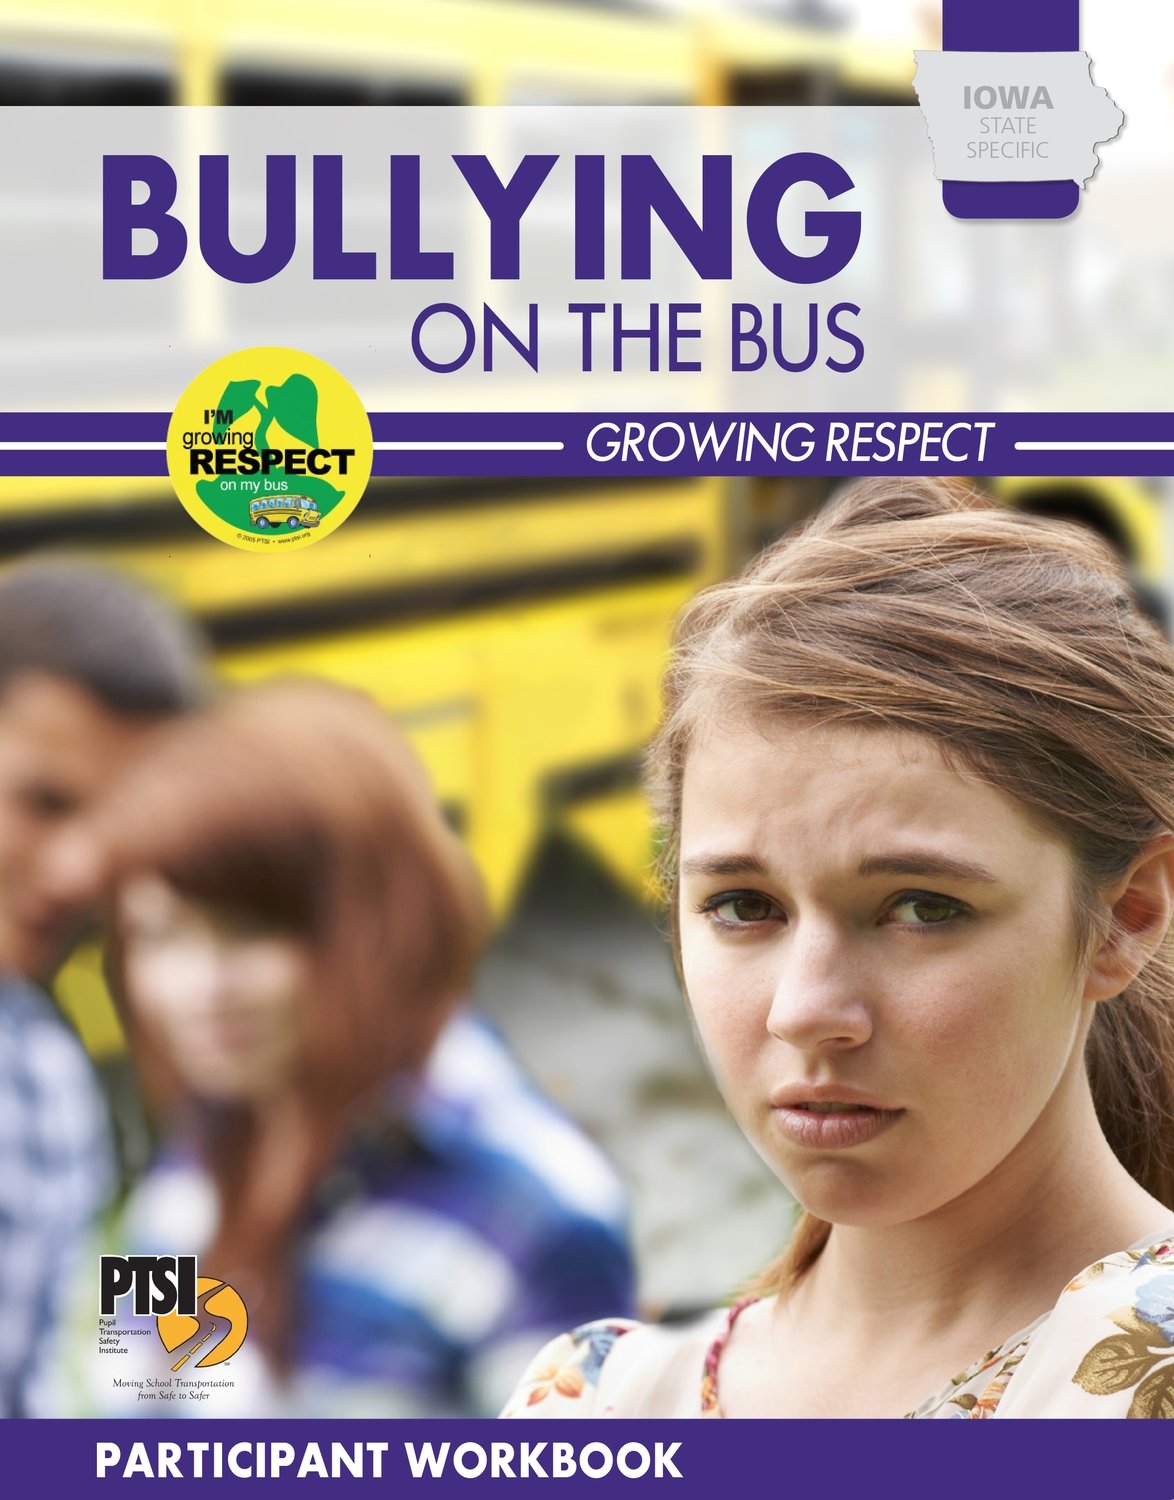 Iowa State Specific — Bullying on the Bus–Growing Respect WORKBOOK